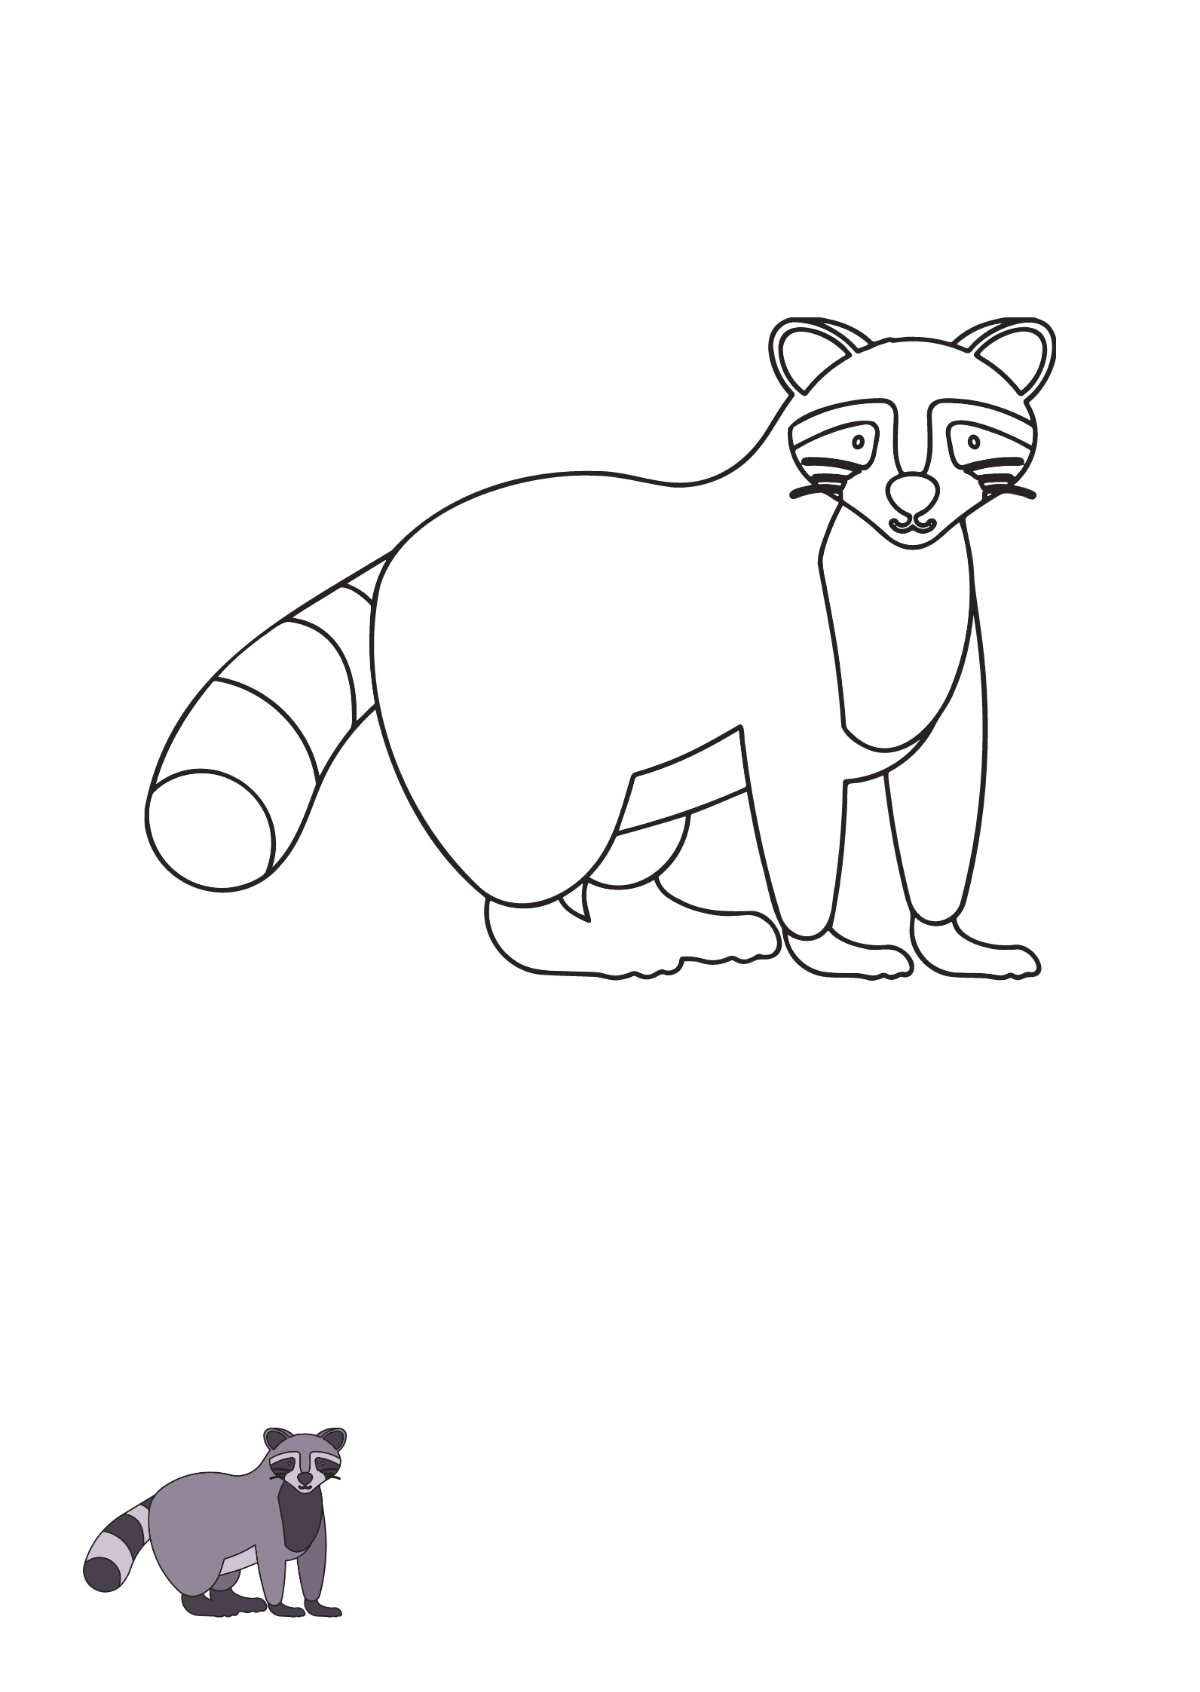 Racoon Coloring Page Template